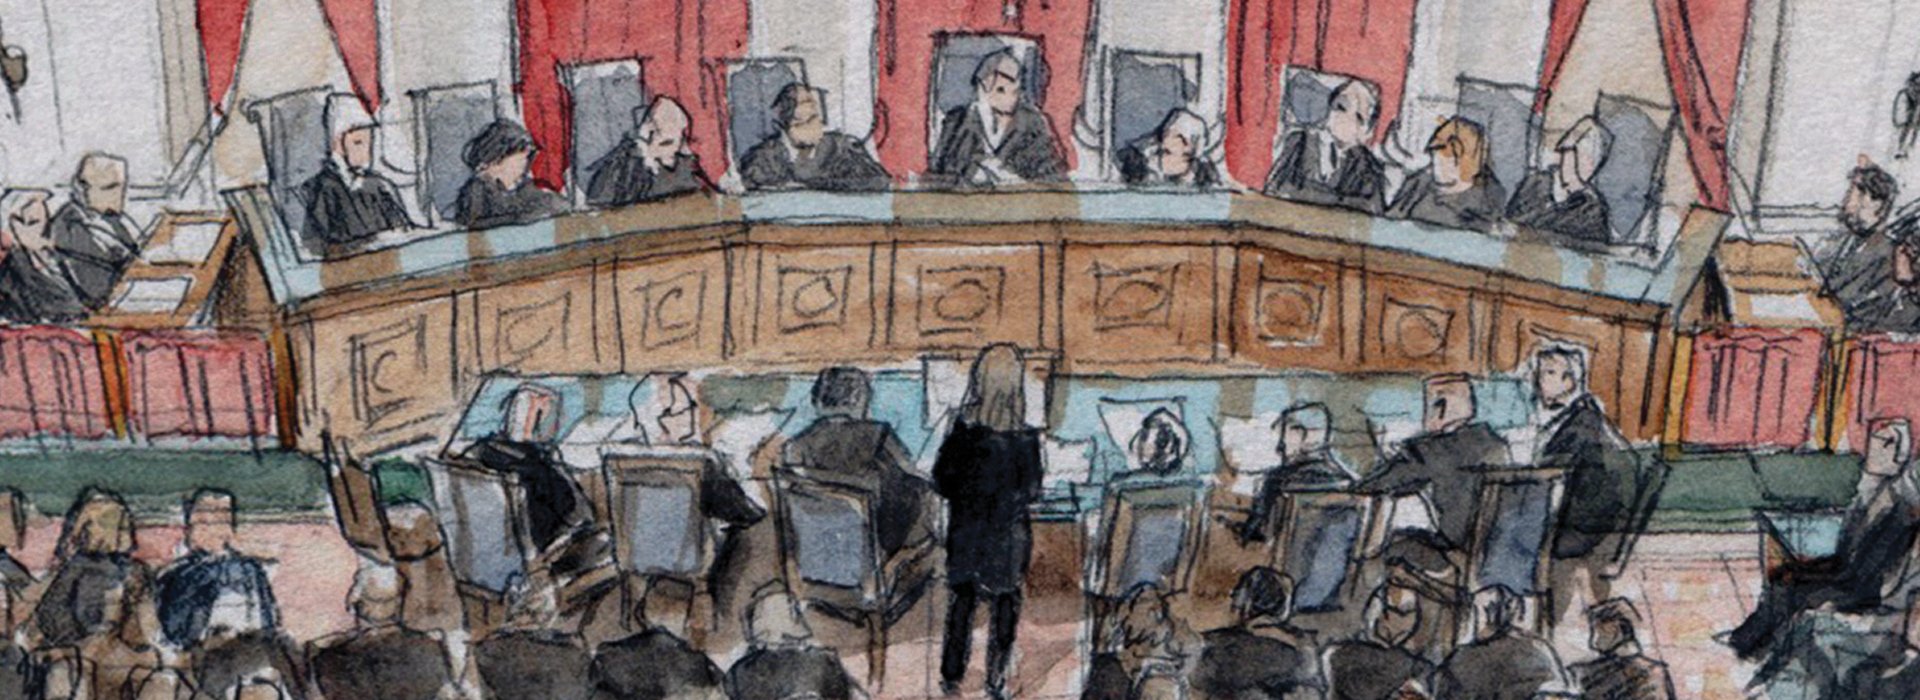 Drawing of the Supreme Court in session